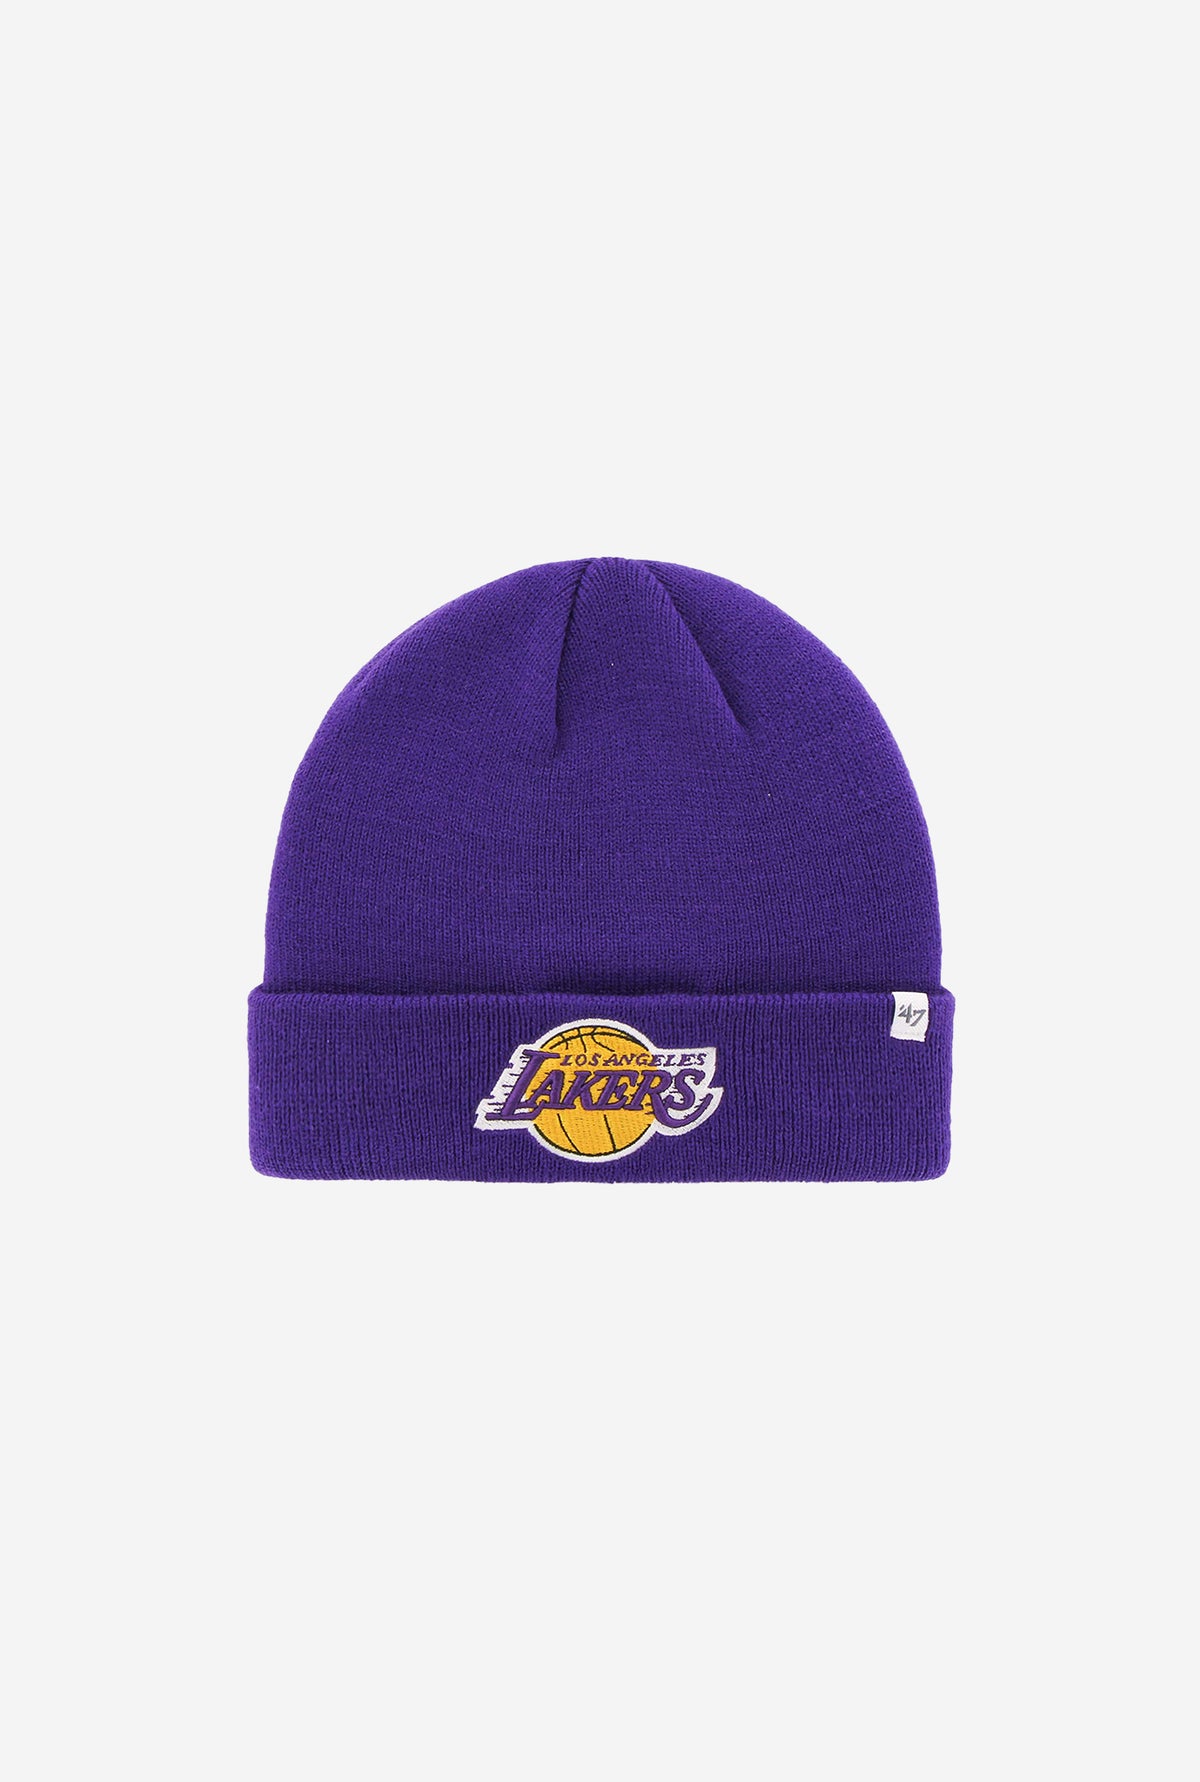 Los Angeles Lakers Raised Cuff Knit Toque